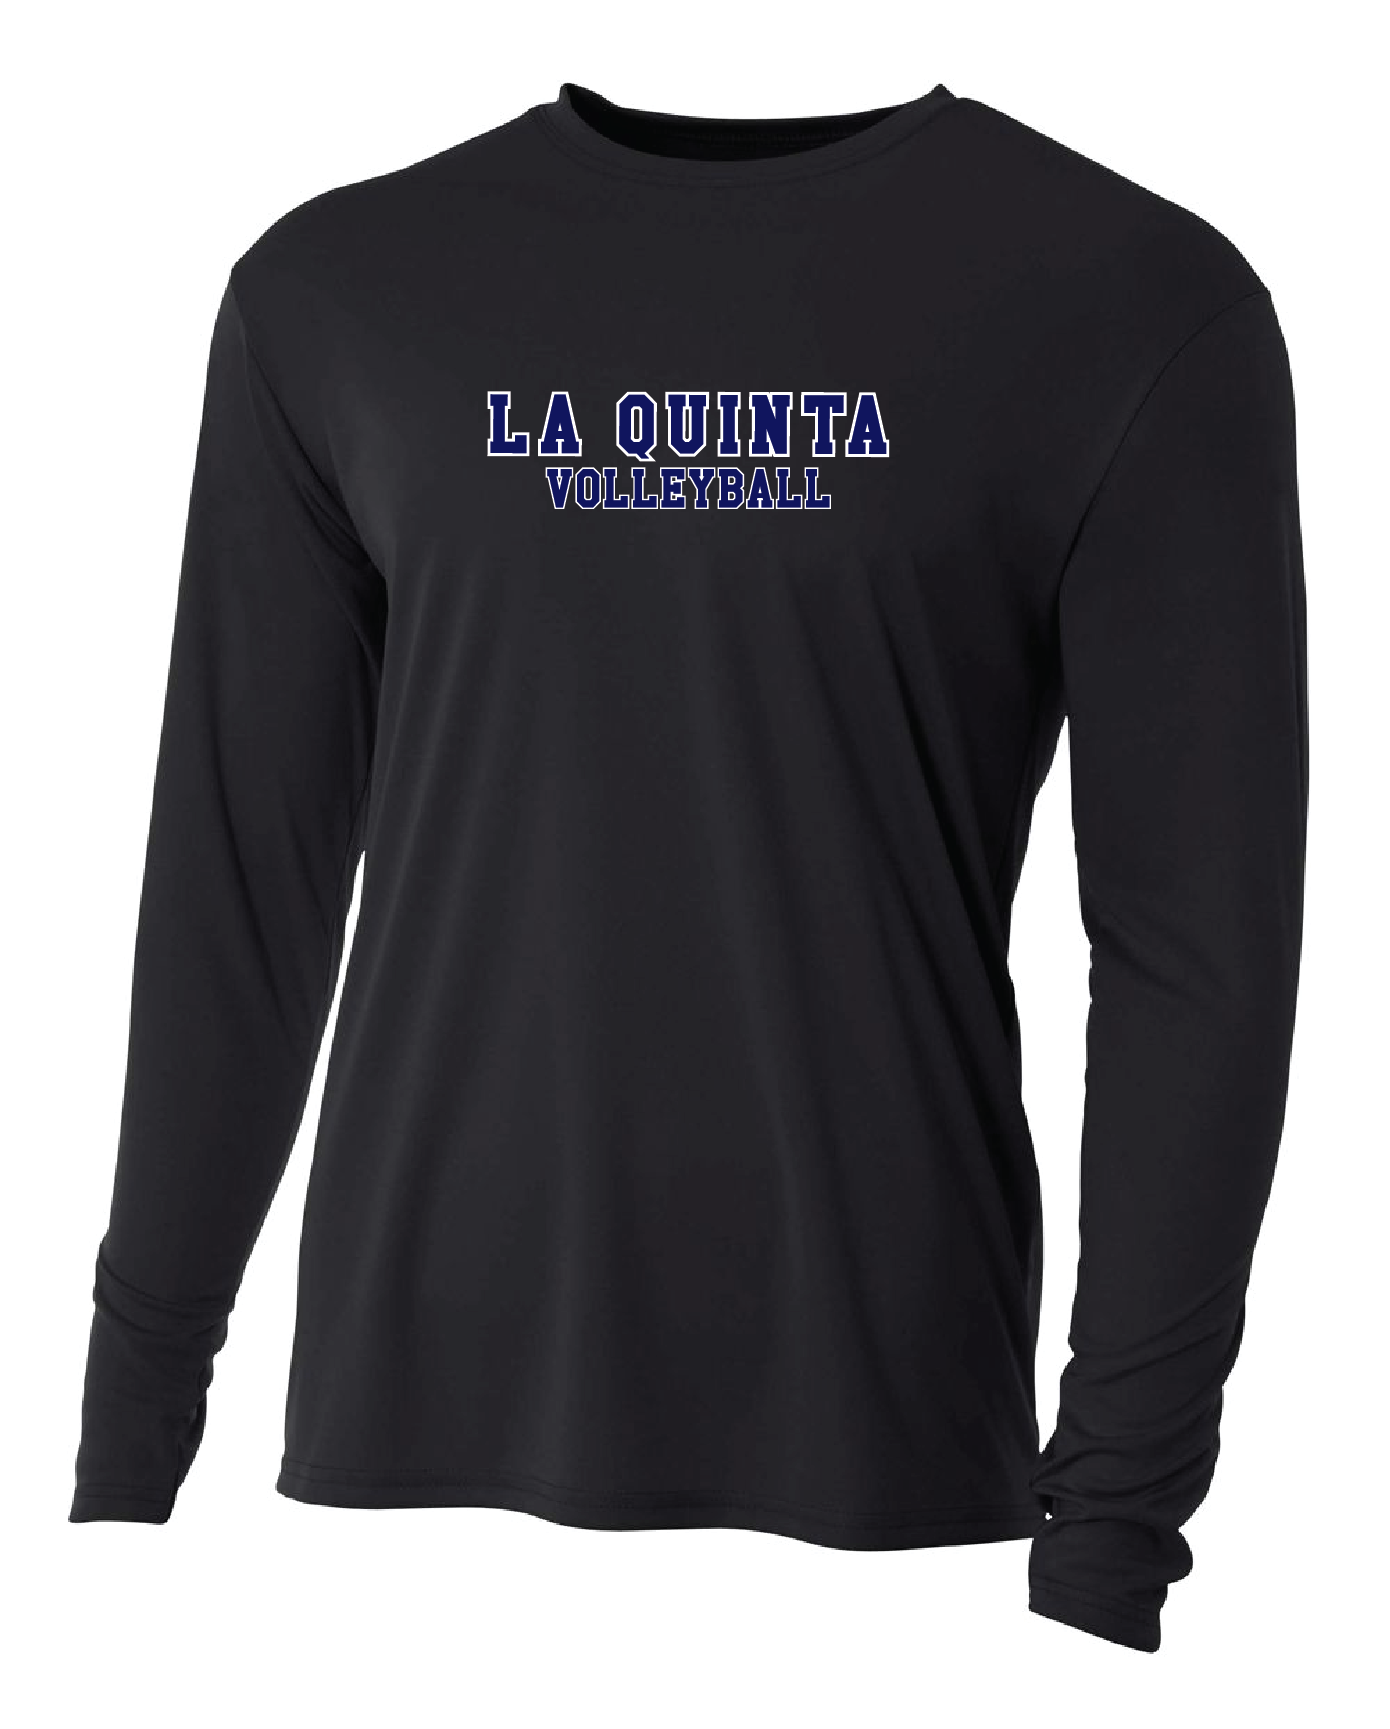 La Quinta Volleyball Unisex Long Sleeve DRY FIT Shirt